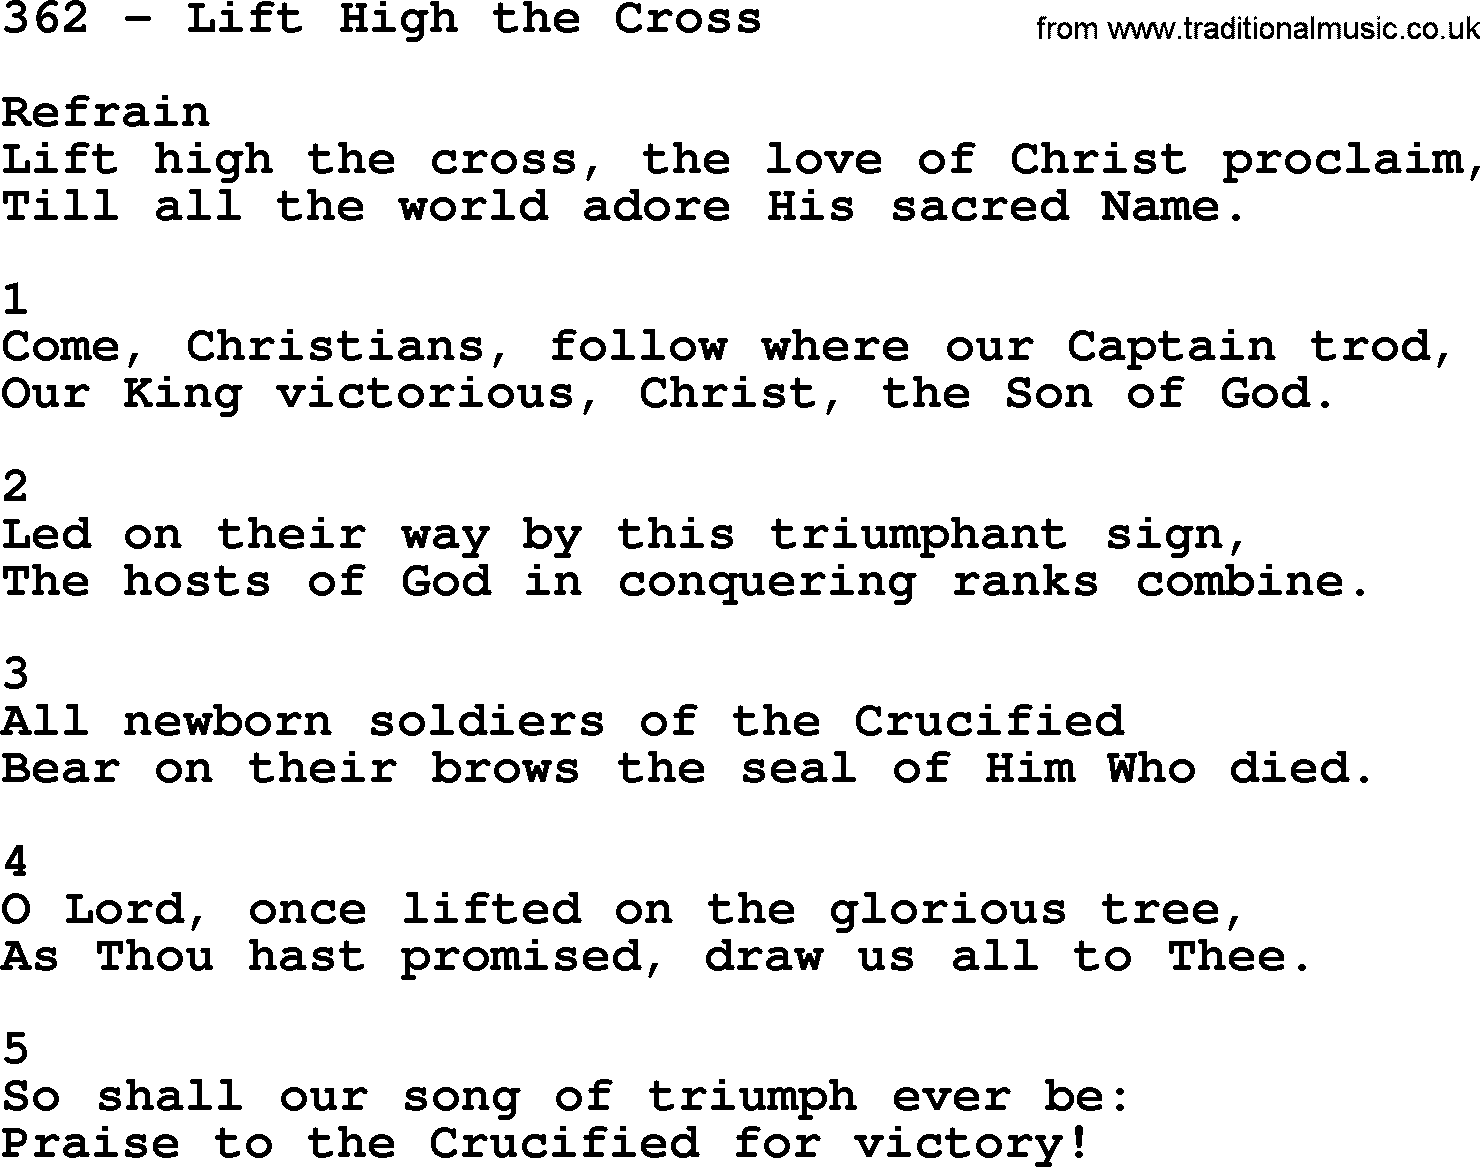 Complete Adventis Hymnal, title: 362-Lift High The Cross, with lyrics, midi, mp3, powerpoints(PPT) and PDF,